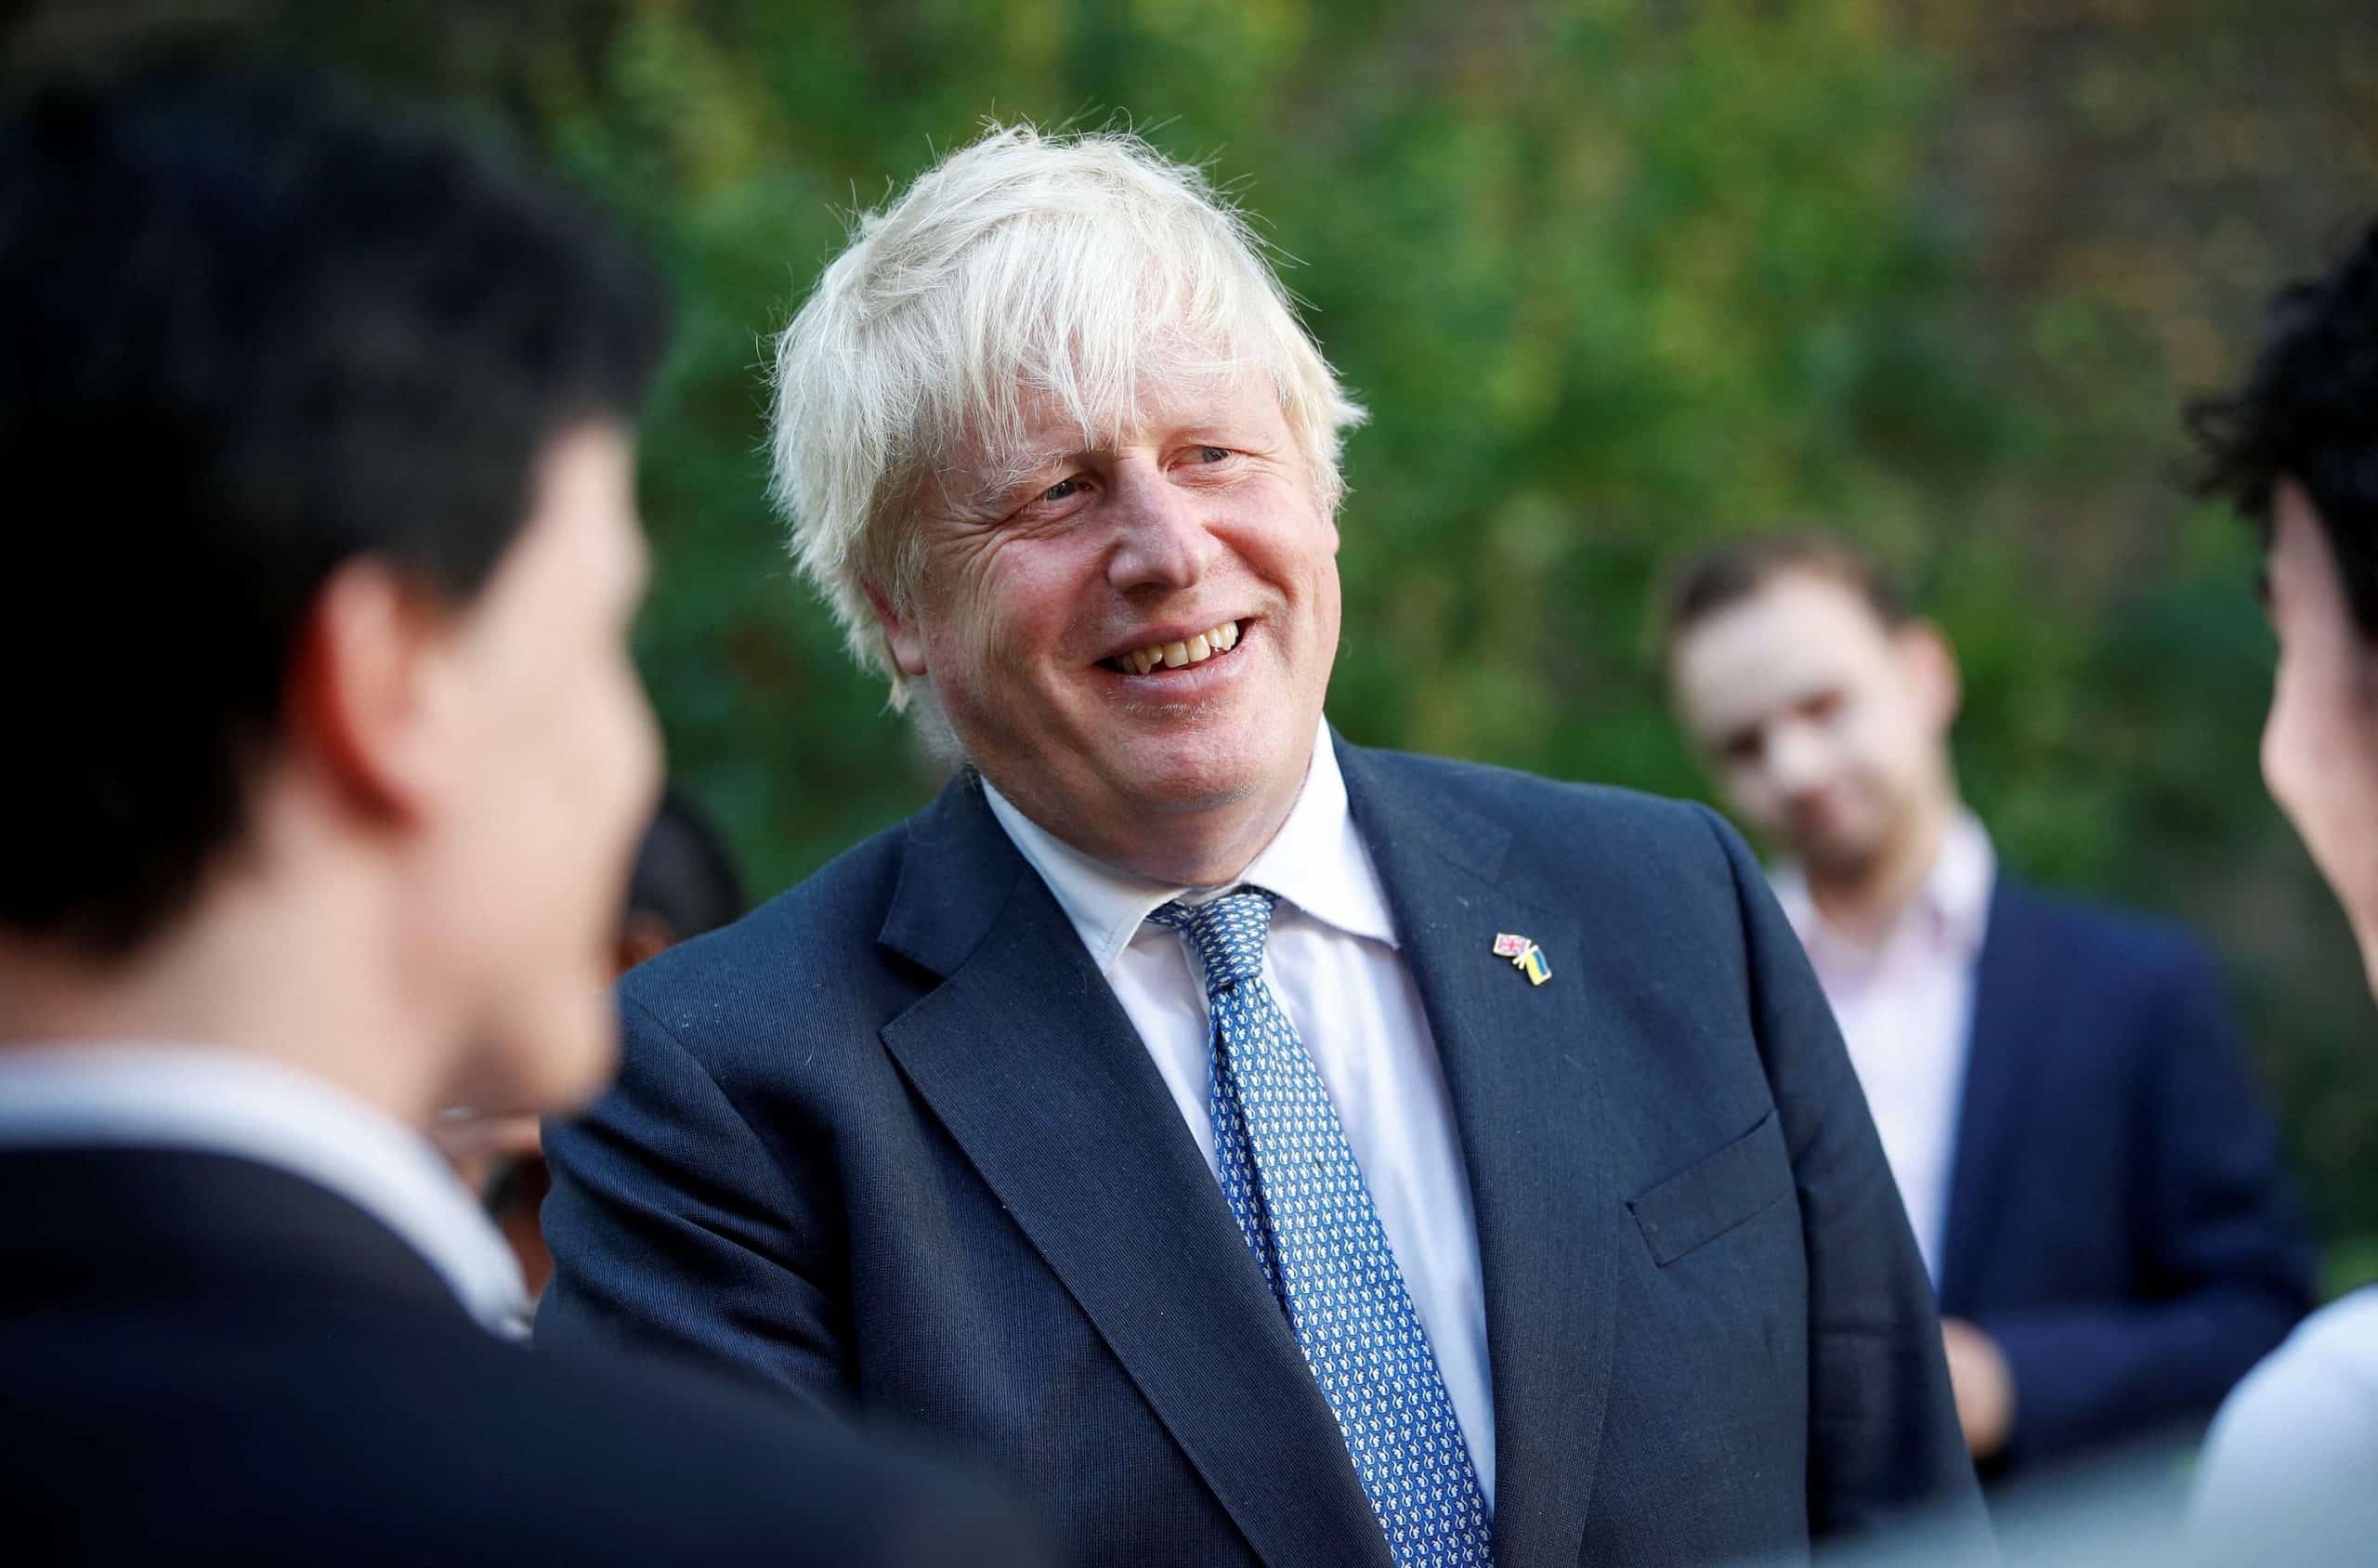 Majority of Conservative MPs expected to abstain on Boris Johnson Partygate vote